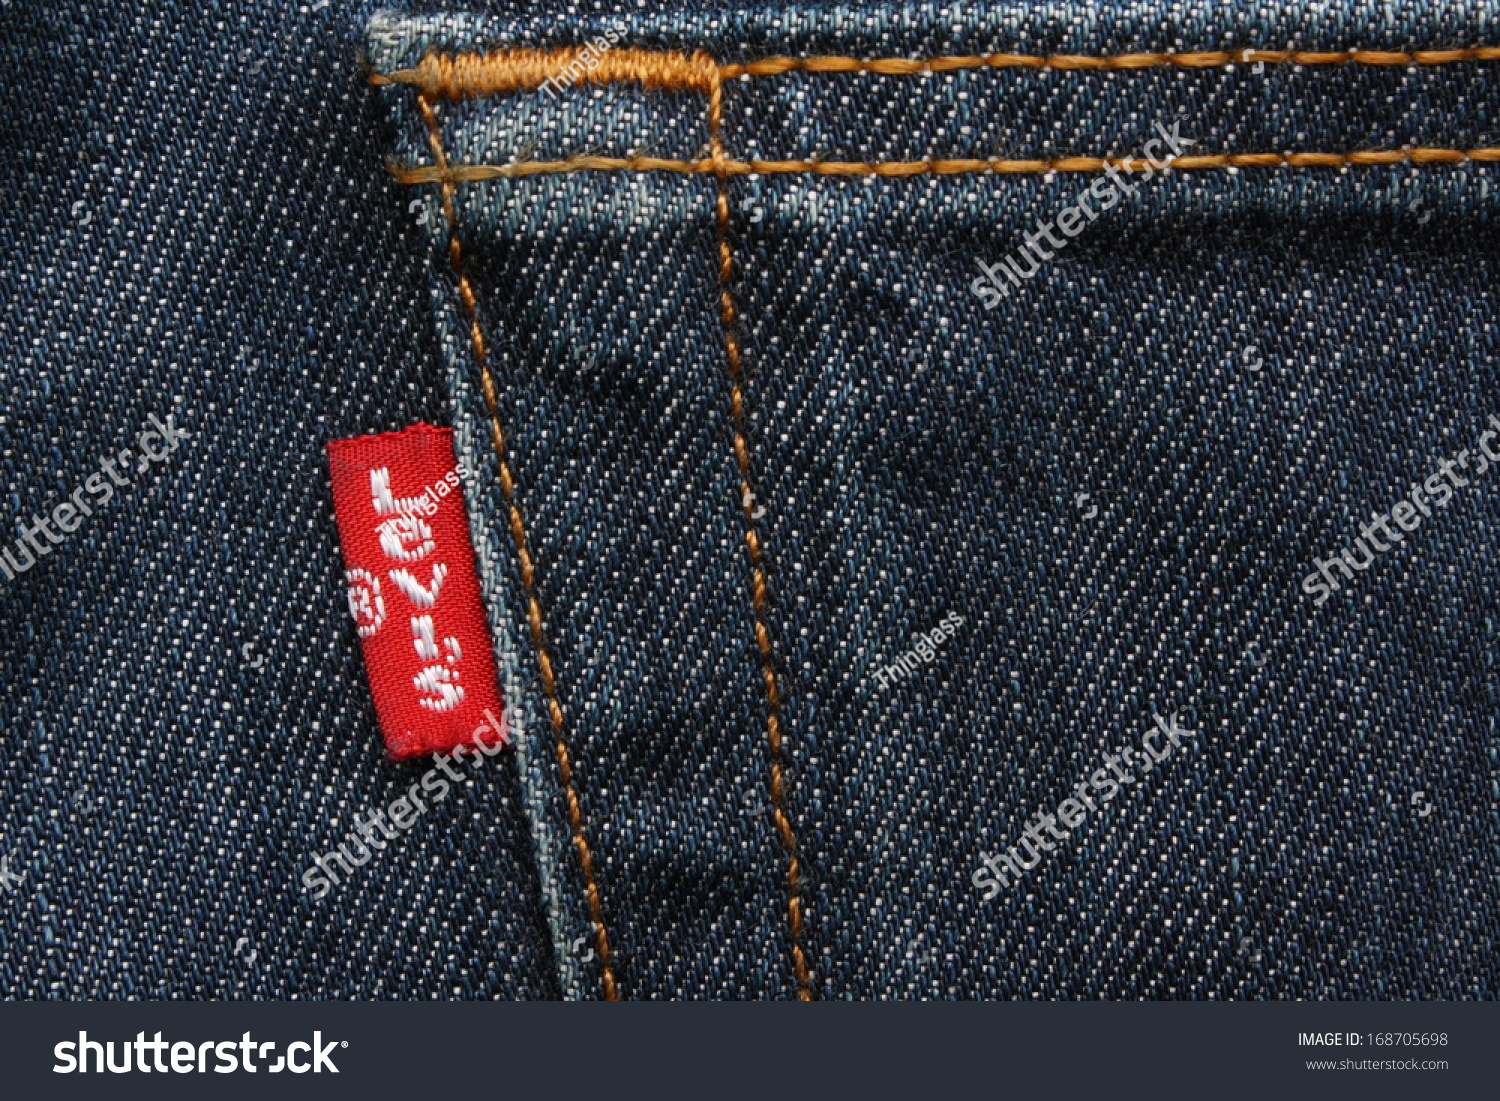 London,England - April 18 2011: Close Up Of The Levis Red Label On The ...